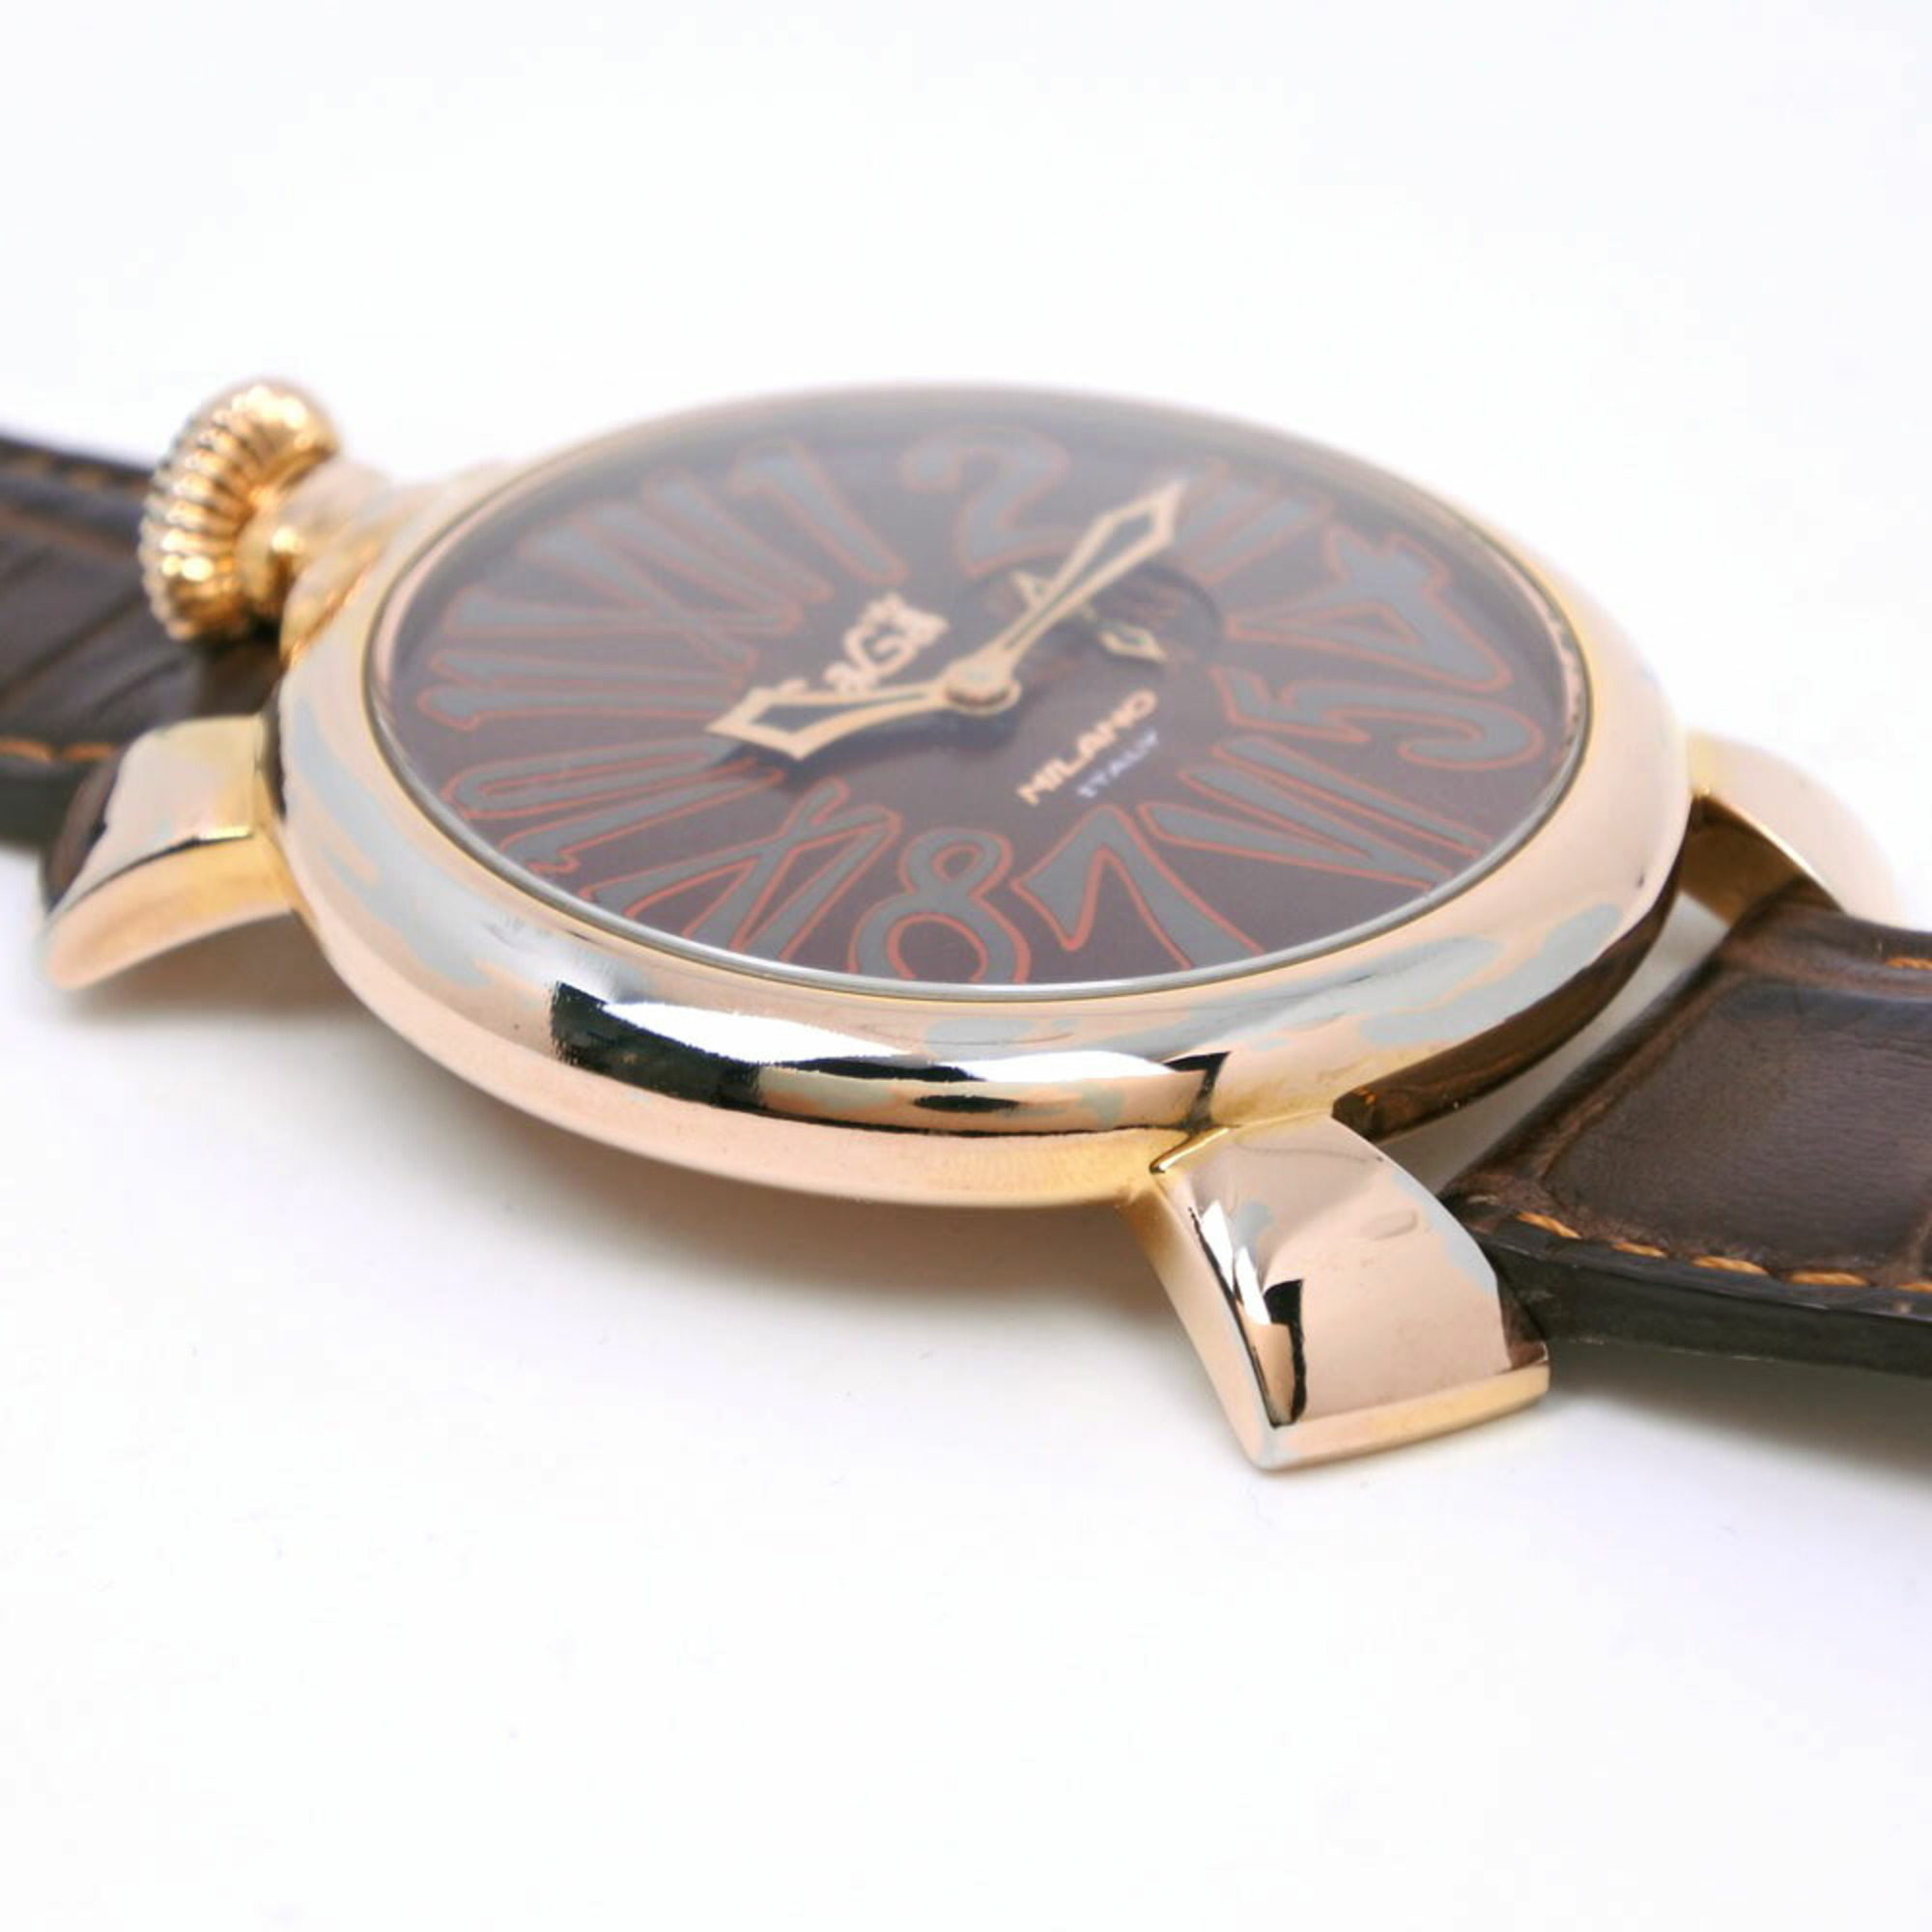 Gaga Milano Manuale 46 Watch, Gold Plated x Leather, Brown Quartz, Small Second, Dial, Manure 46, Men's, H200223529